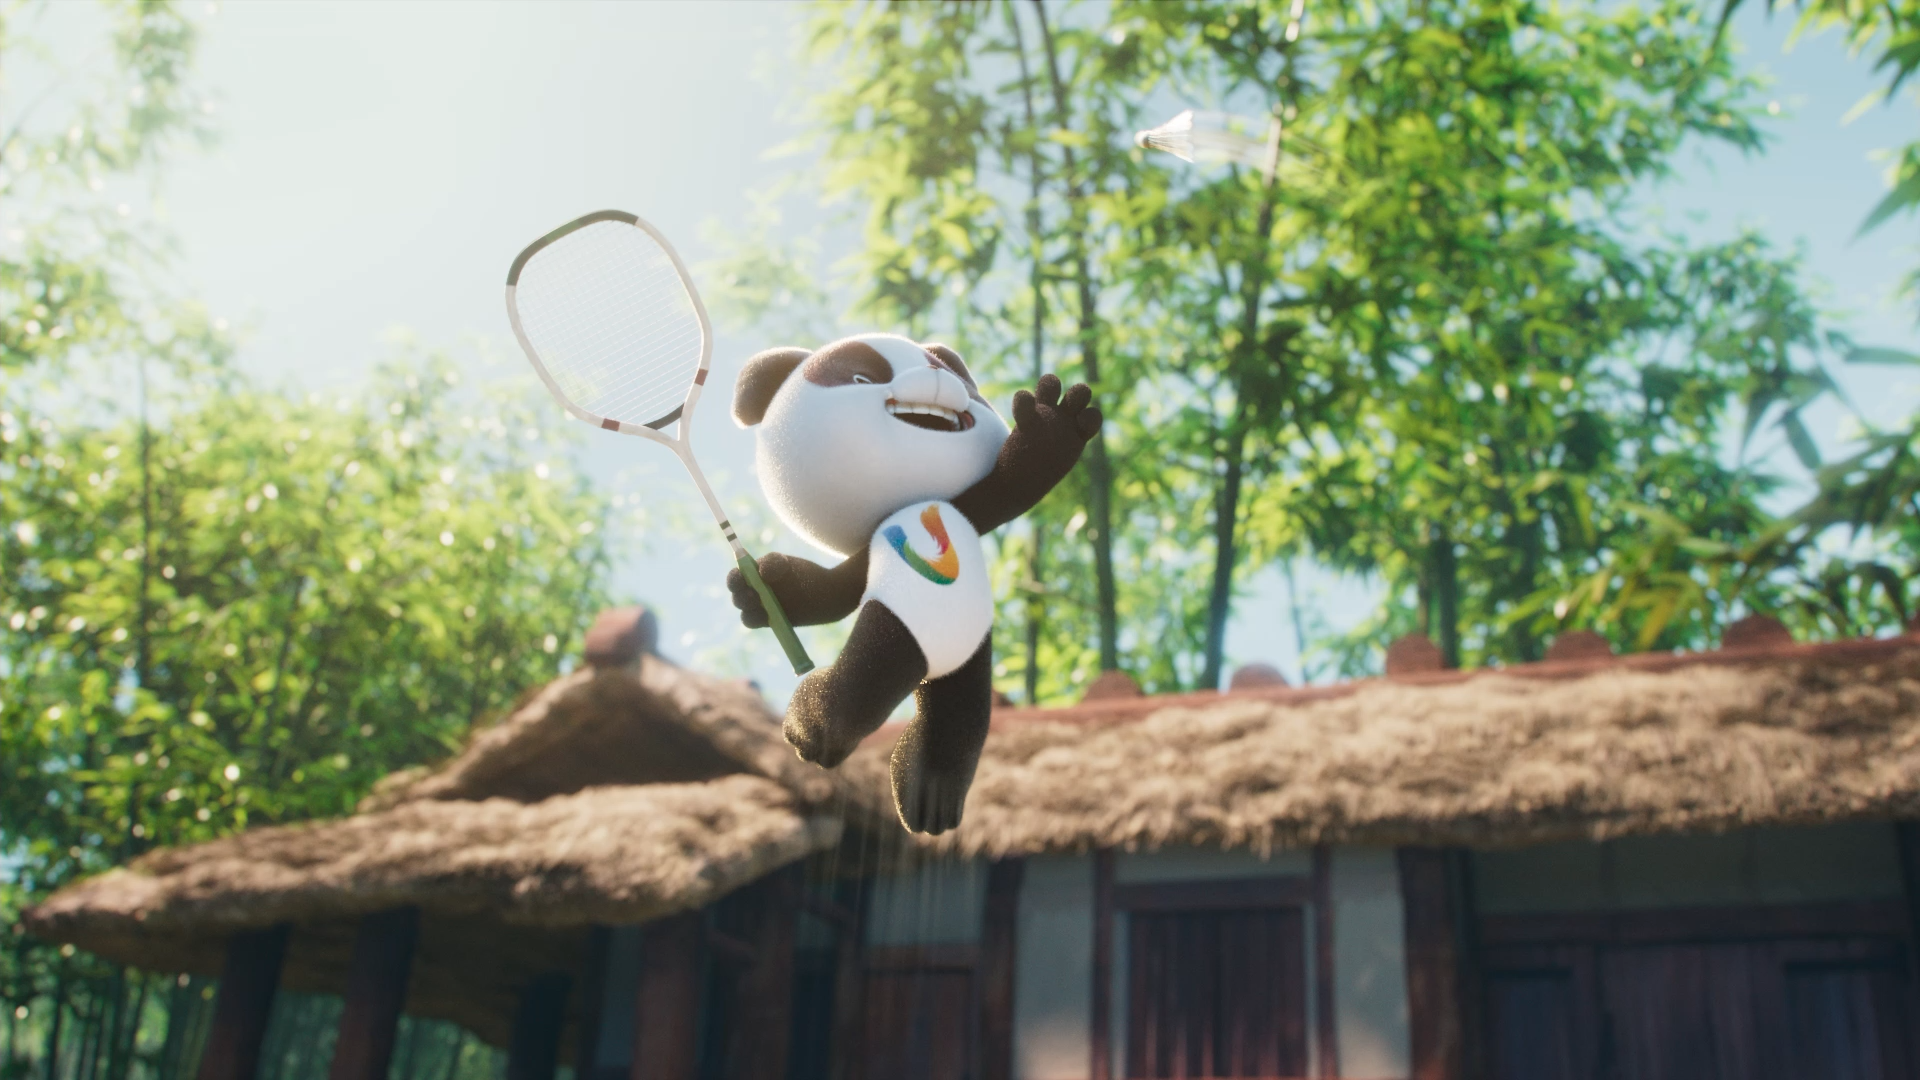 FISU launches video to countdown to Chengdu 2021 coinciding with Lantern Festival